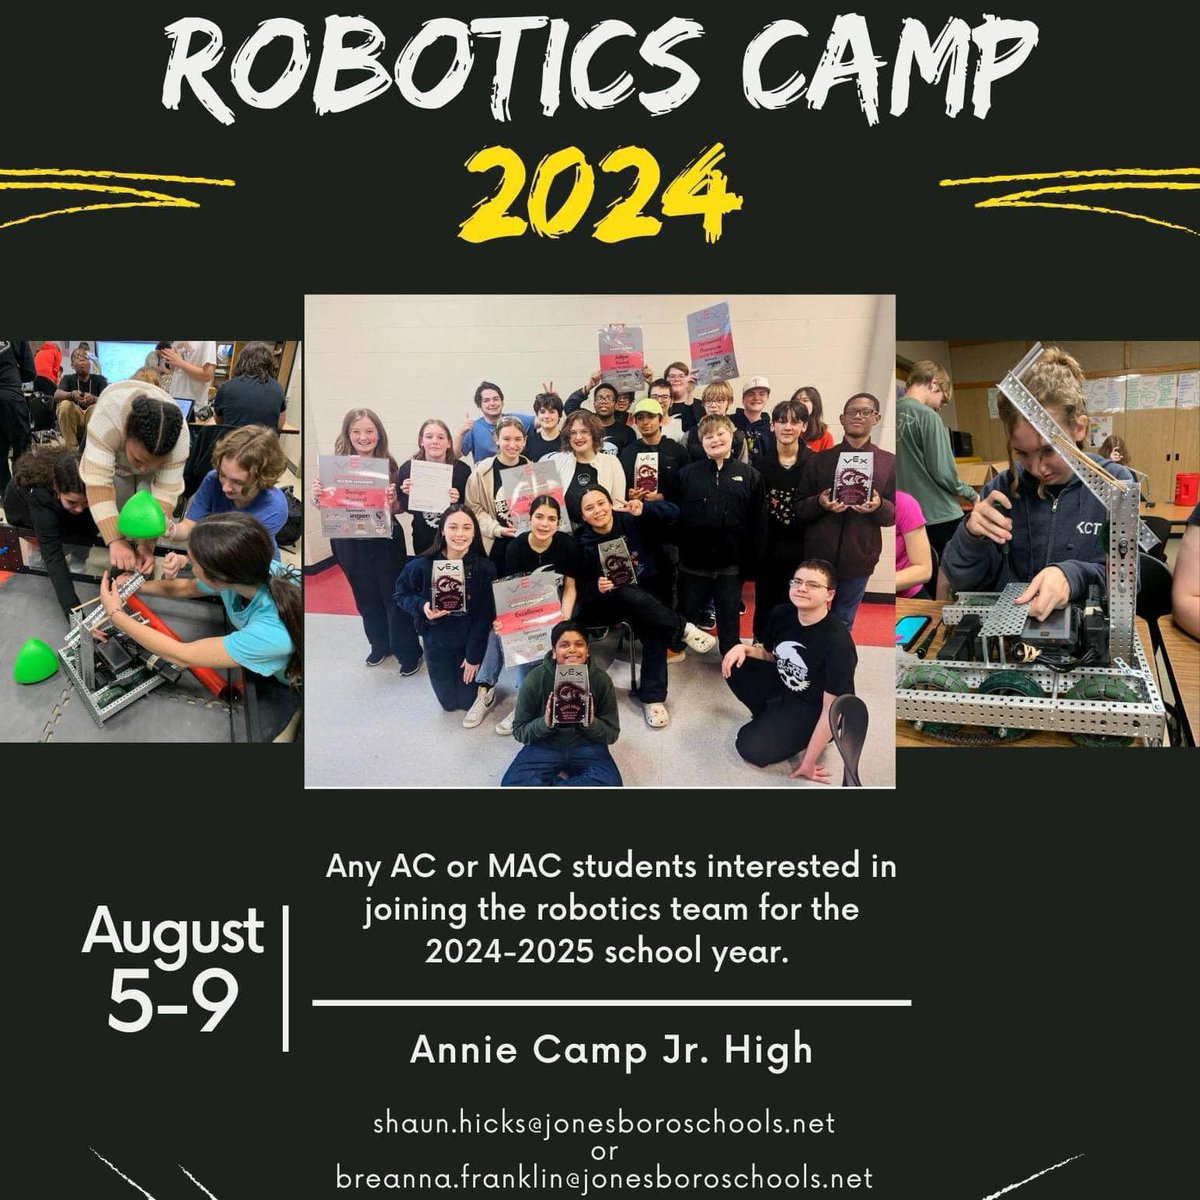 ATT: Robotics camp for any upcoming AC/MAC student interested in joining robotics team>Aug 5-9, 10 am - 2 pm @ Annie Camp/Apply by June 1! bit.ly/4dEk8Sm Questions? Email shaun.hicks@jonesboroschools.net or breanna.franklin@jonesboroschools.net RT